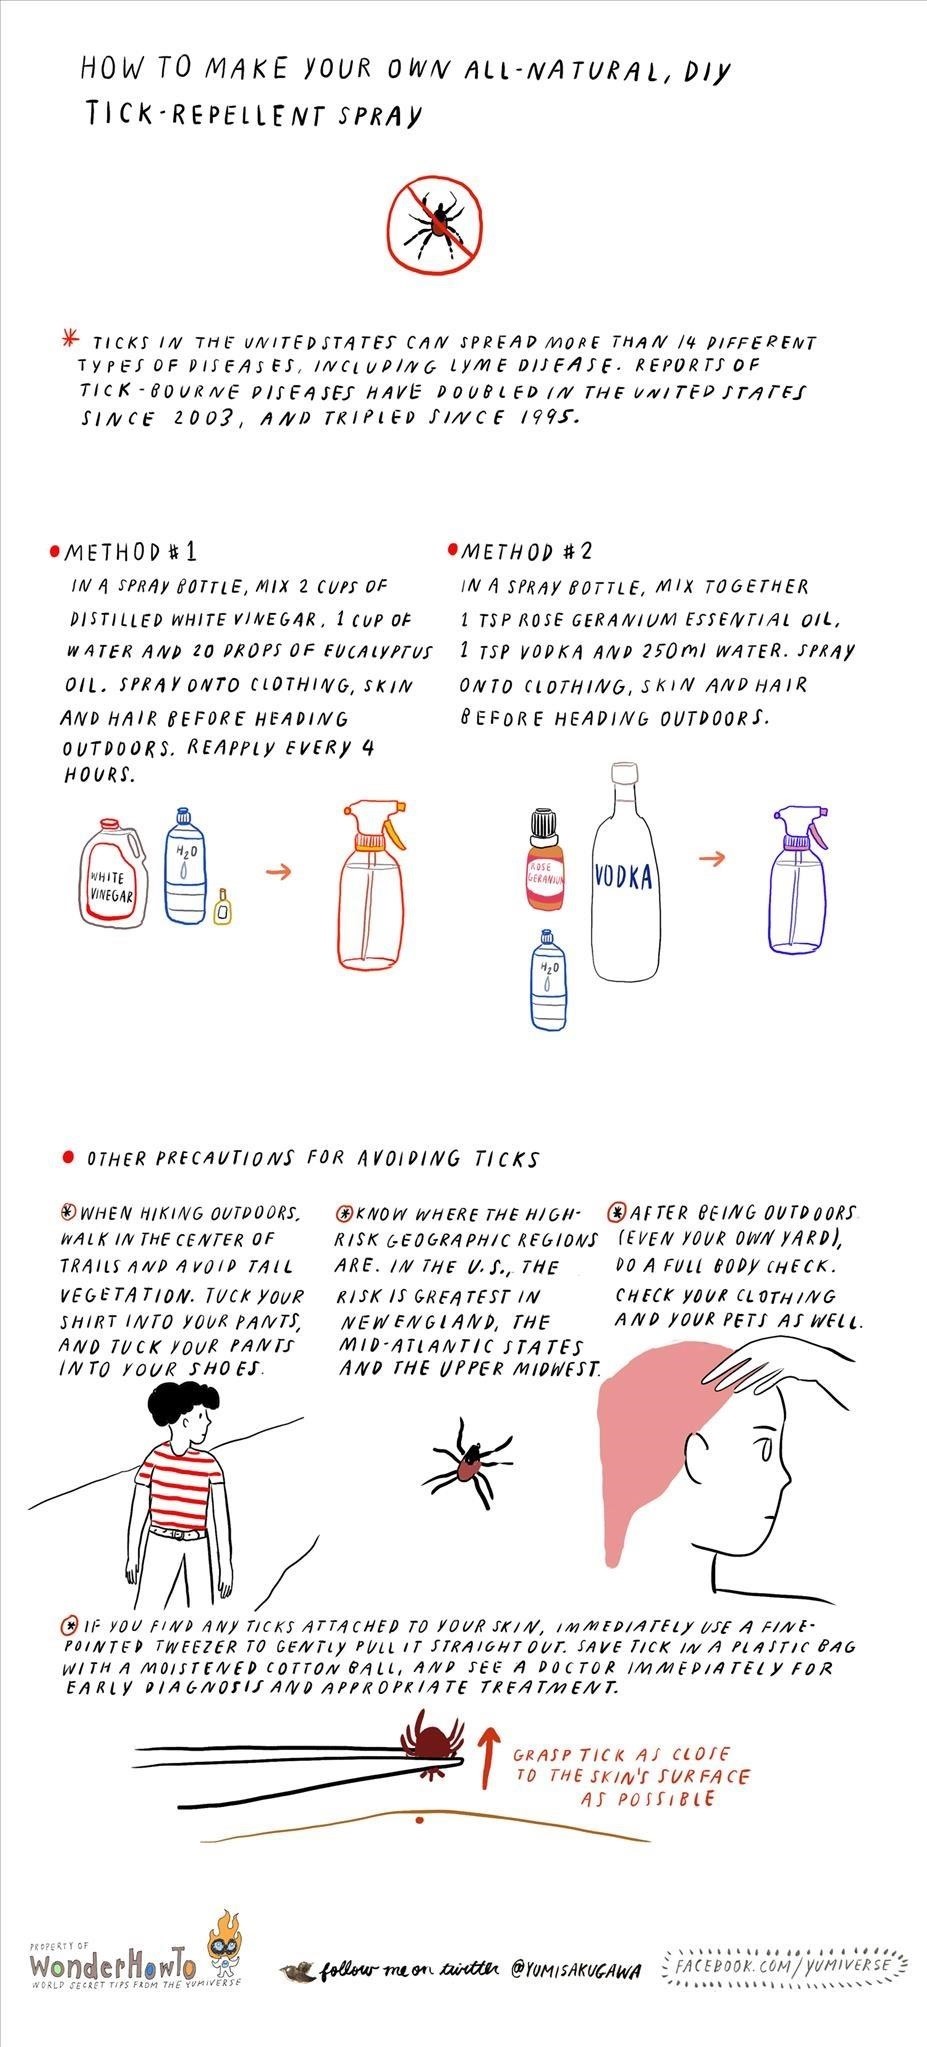 How to Make Your Own All-Natural Tick Repellent Spray